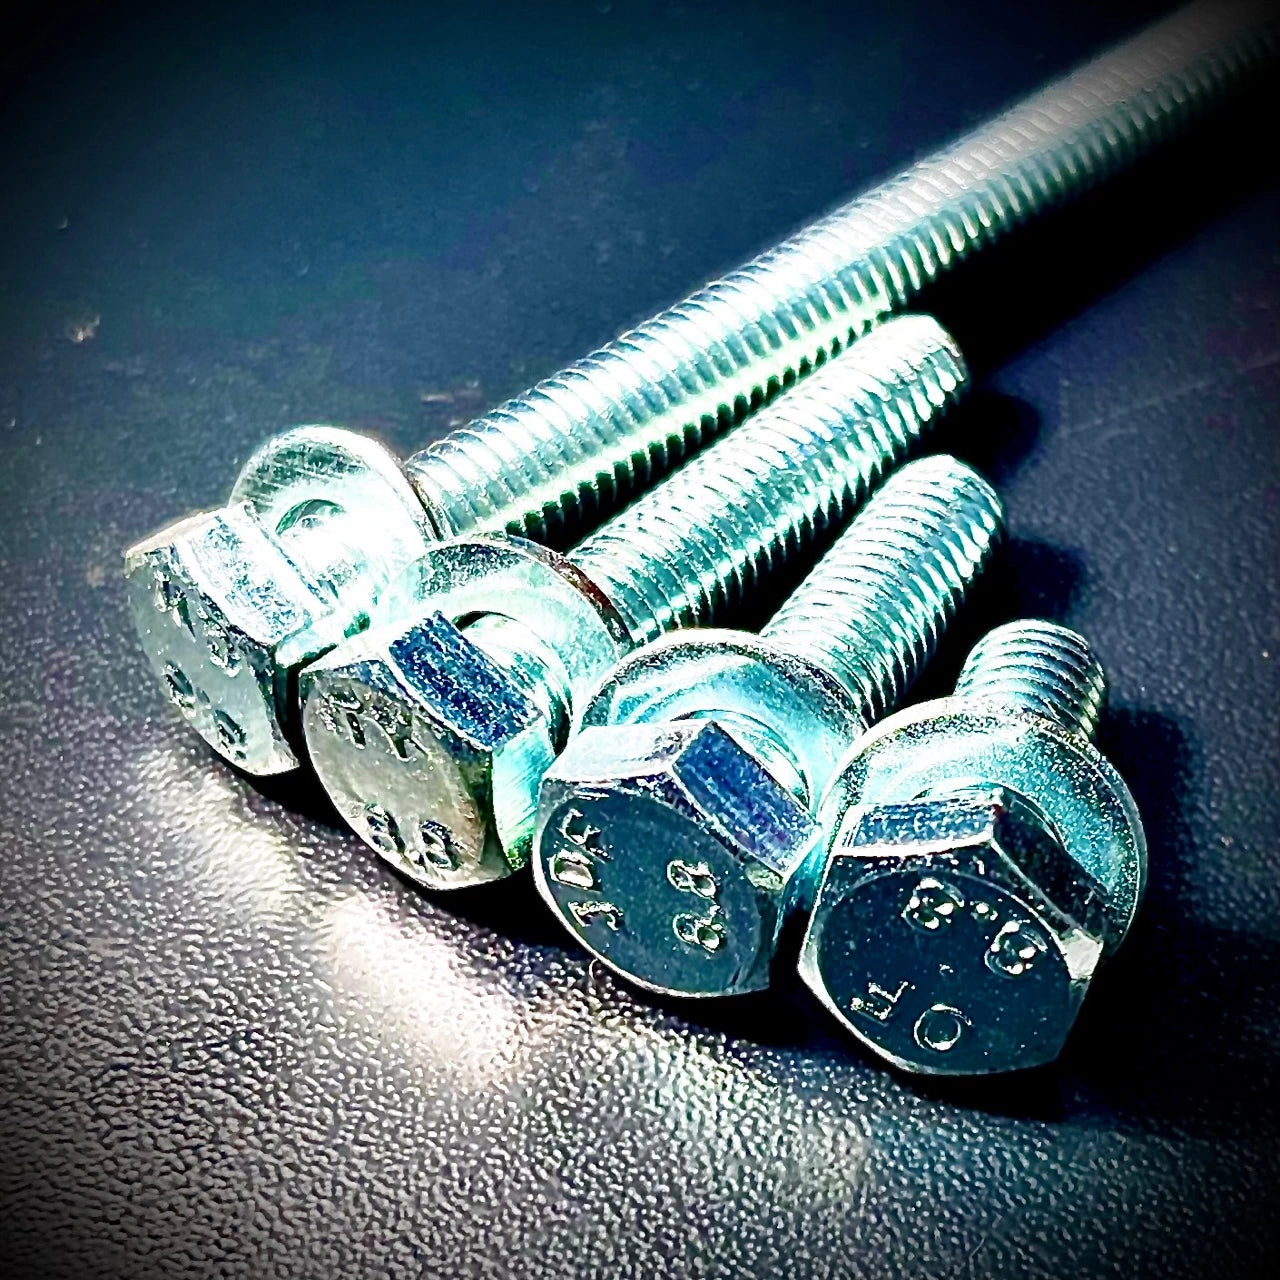 M10 x Under 55mm Hex Set Screw plus Washer HT 8.8 Zinc DIN933 - Fixaball Ltd. Fixings and Fasteners UK